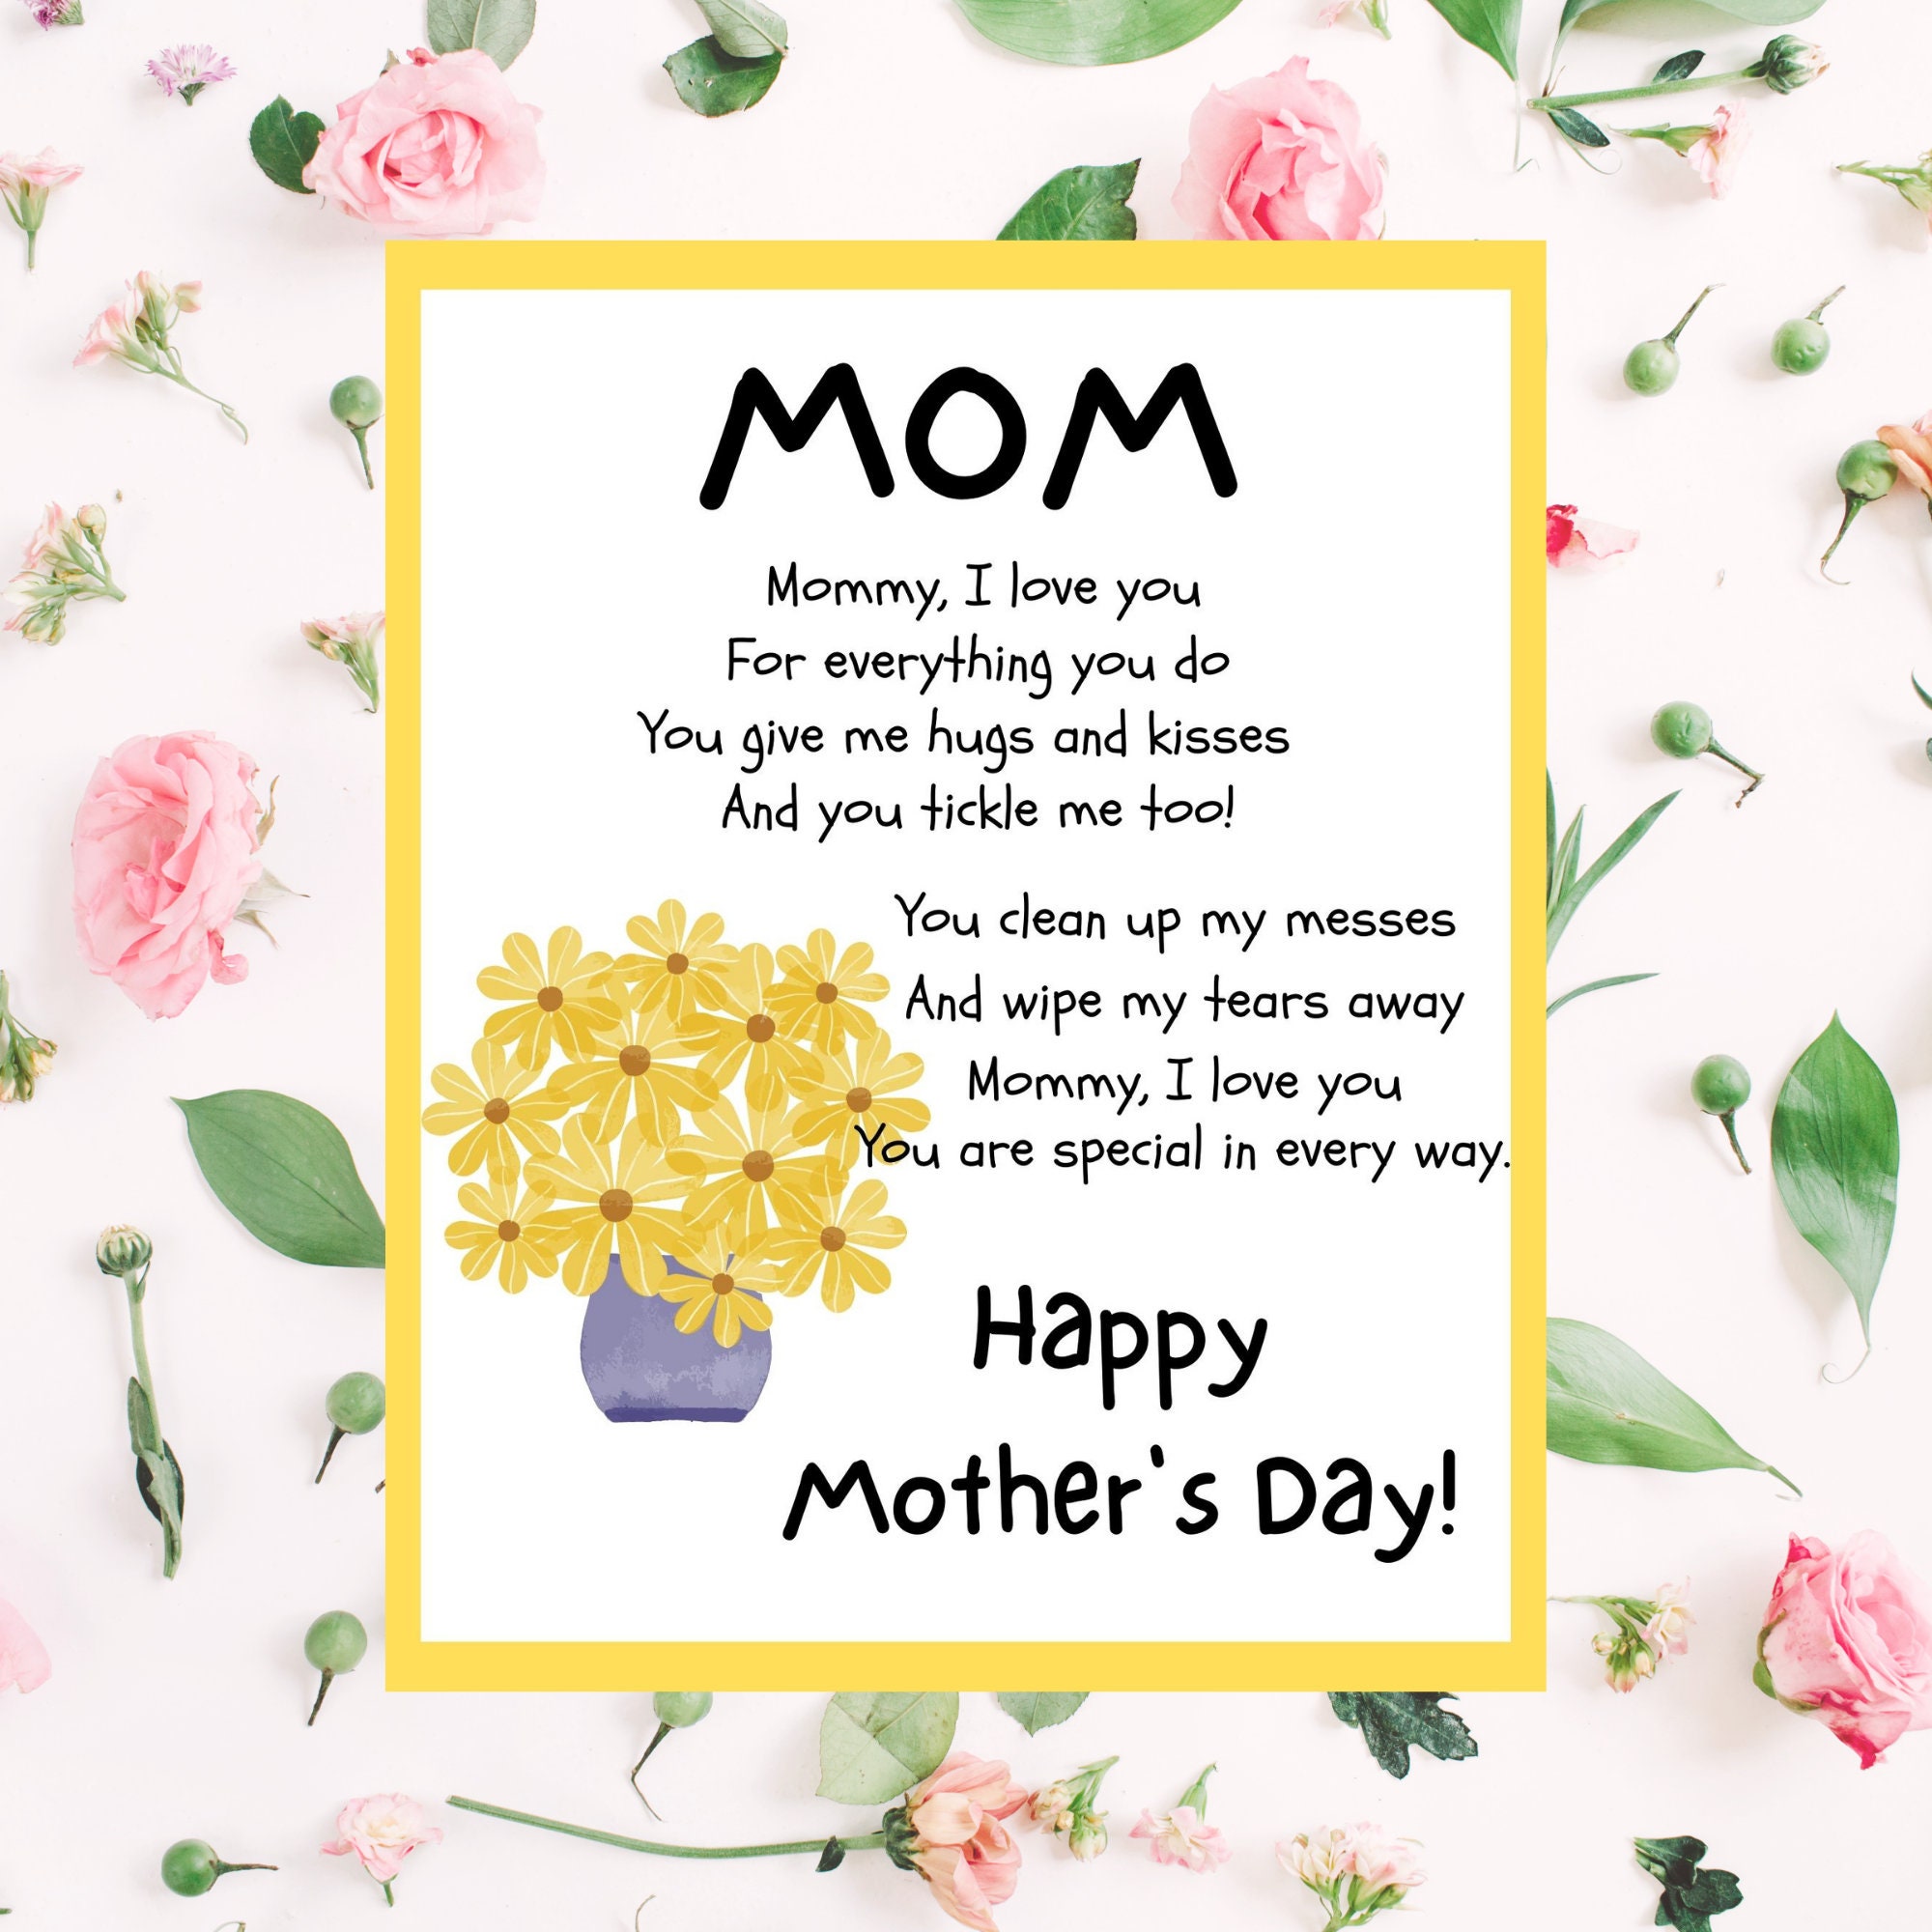 MOM Mother's Day Poem Printable Mother's Day Poem - Etsy